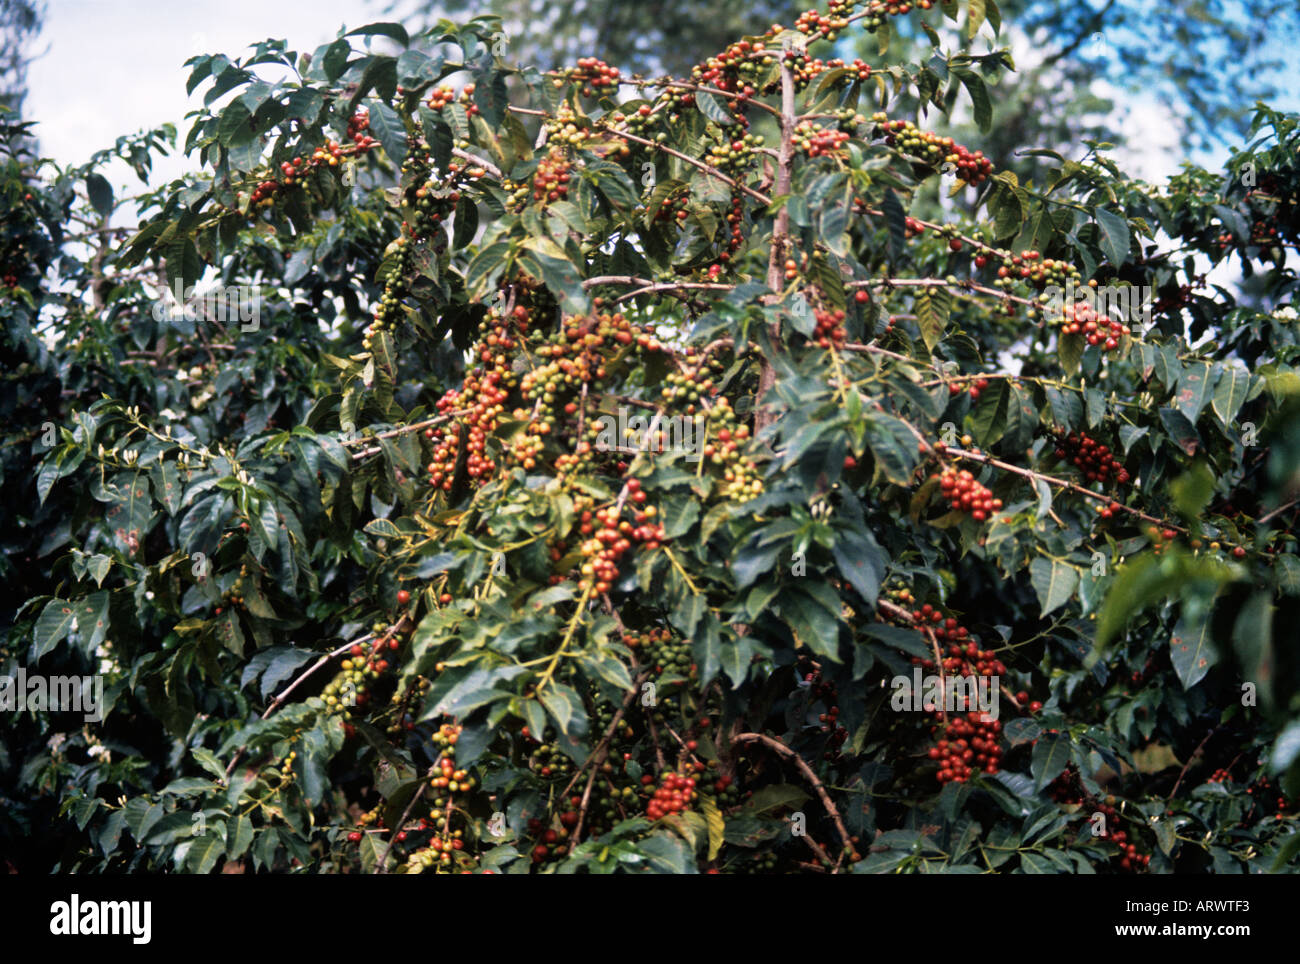 Ripe coffee beans on an evergreen tree in a Kenya plantation are ready for picking Stock Photo